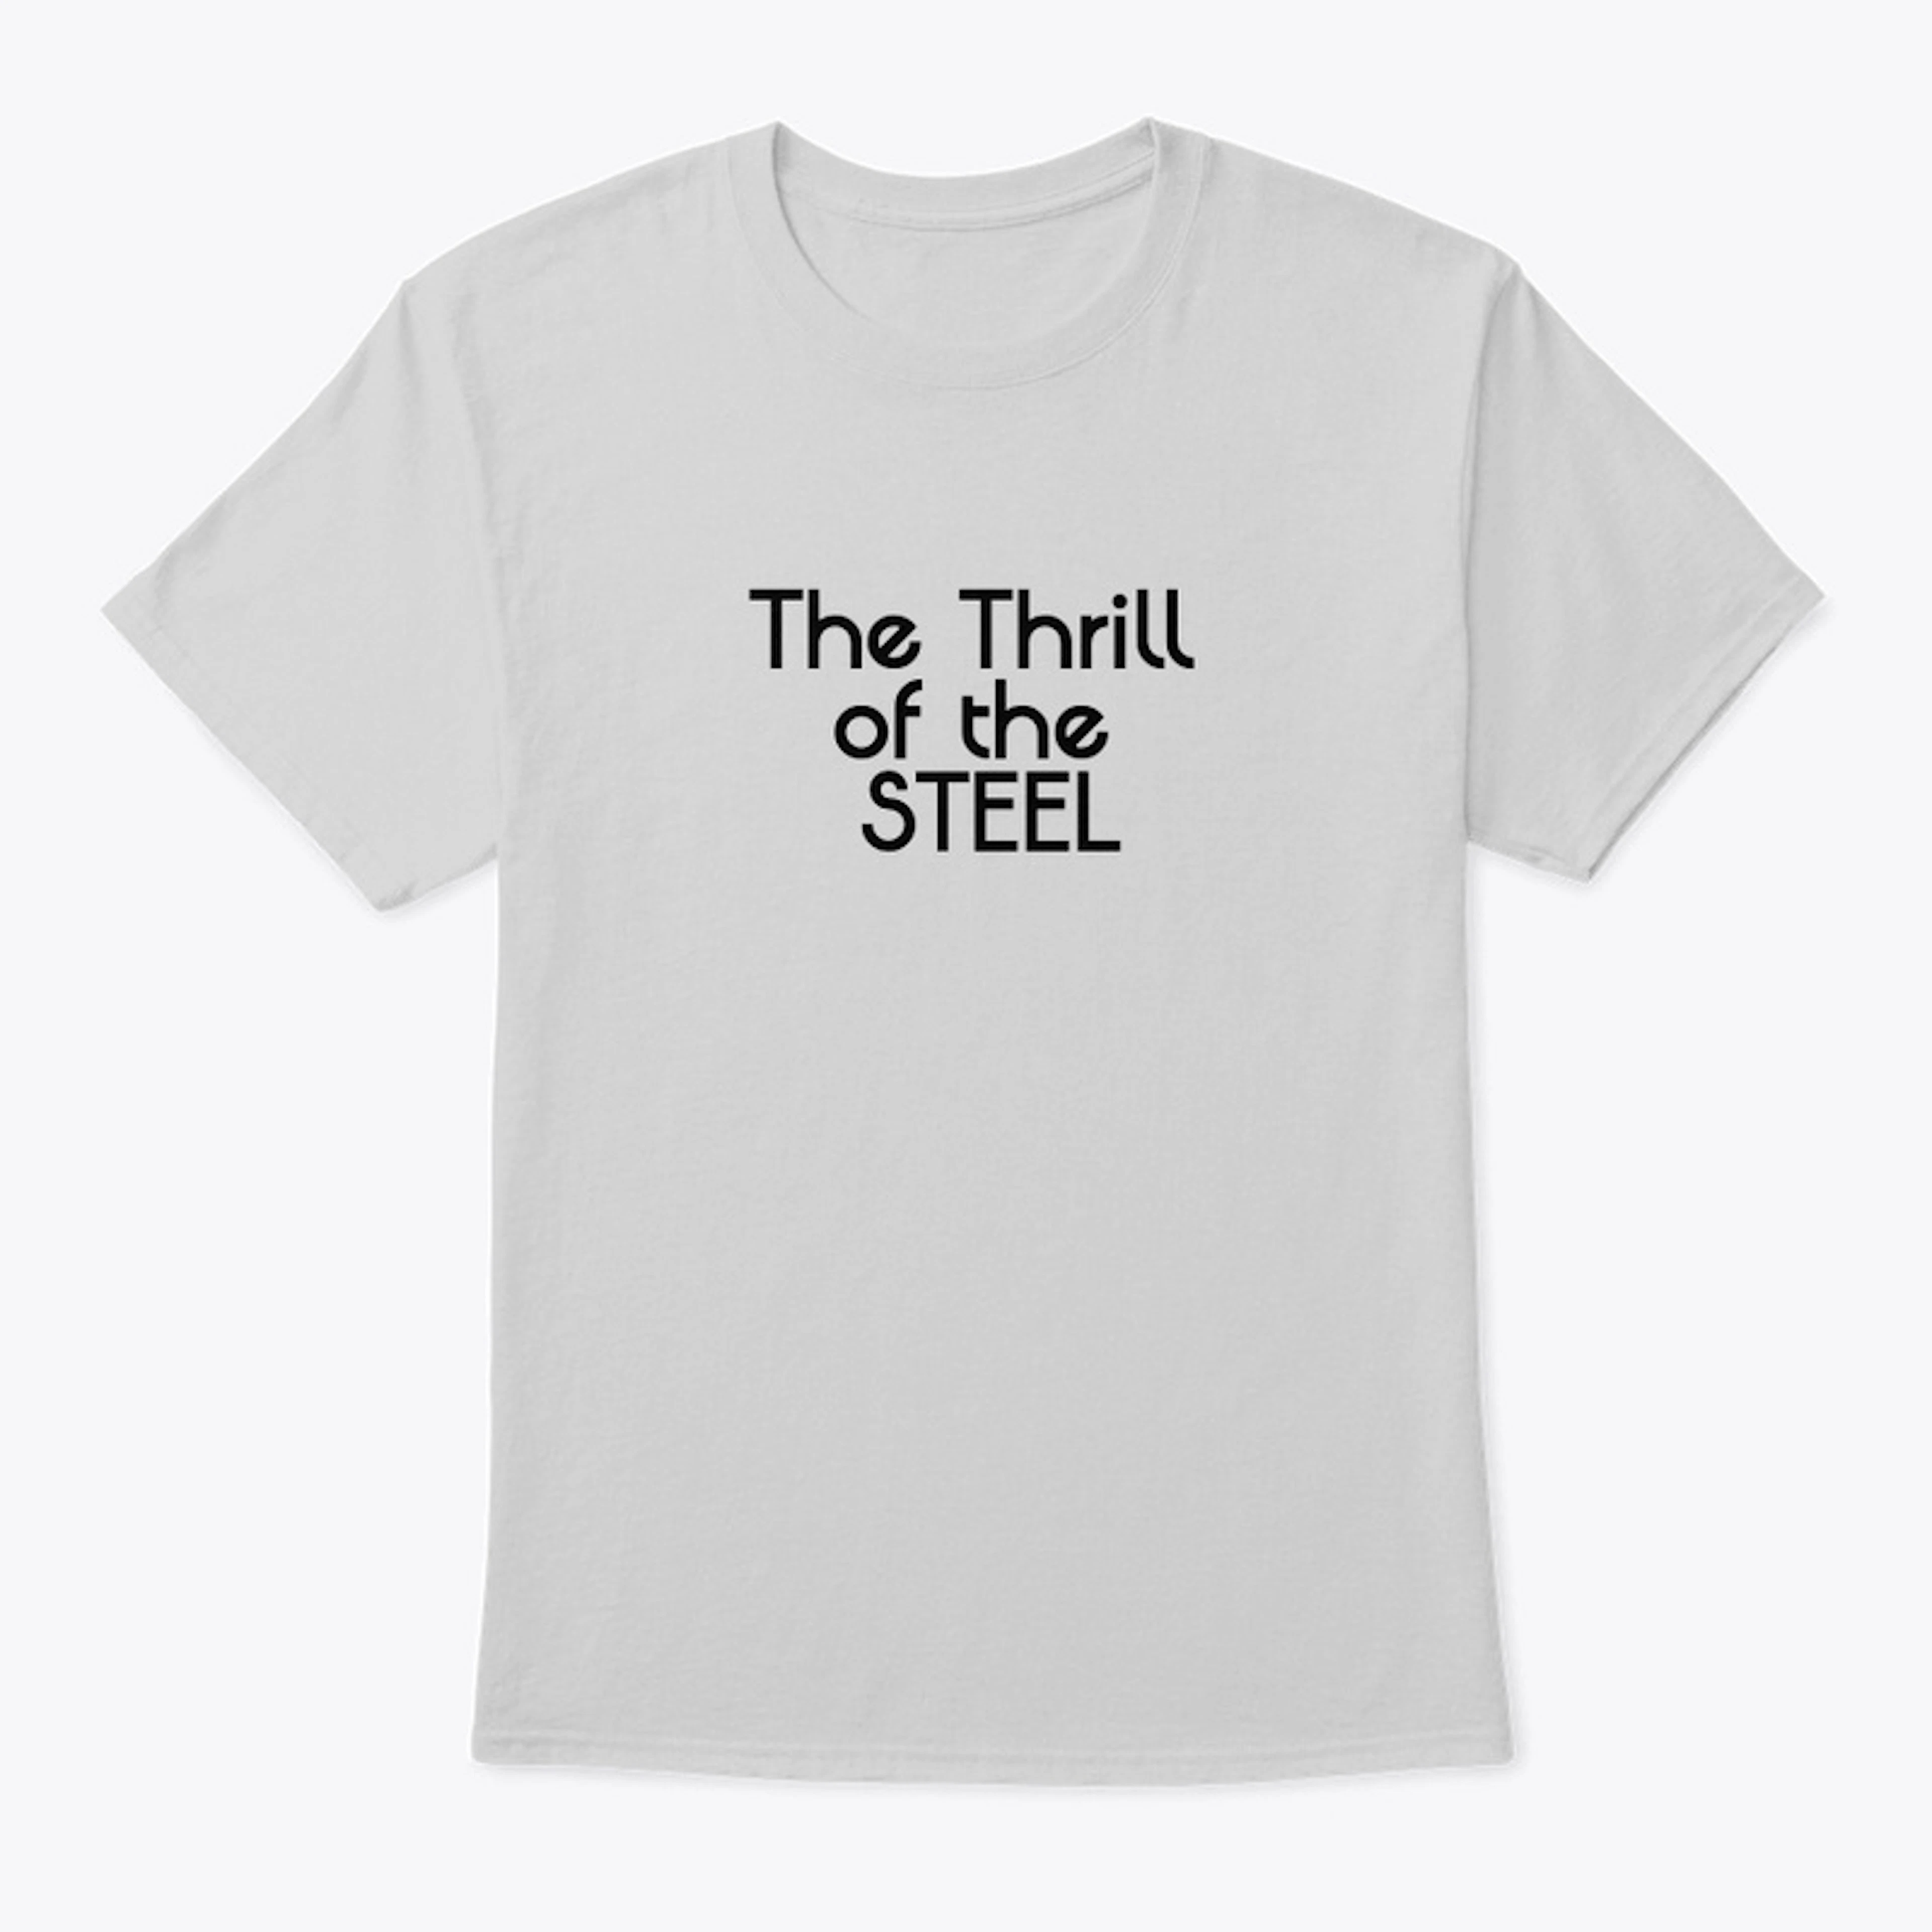 The Thrill of the Steel